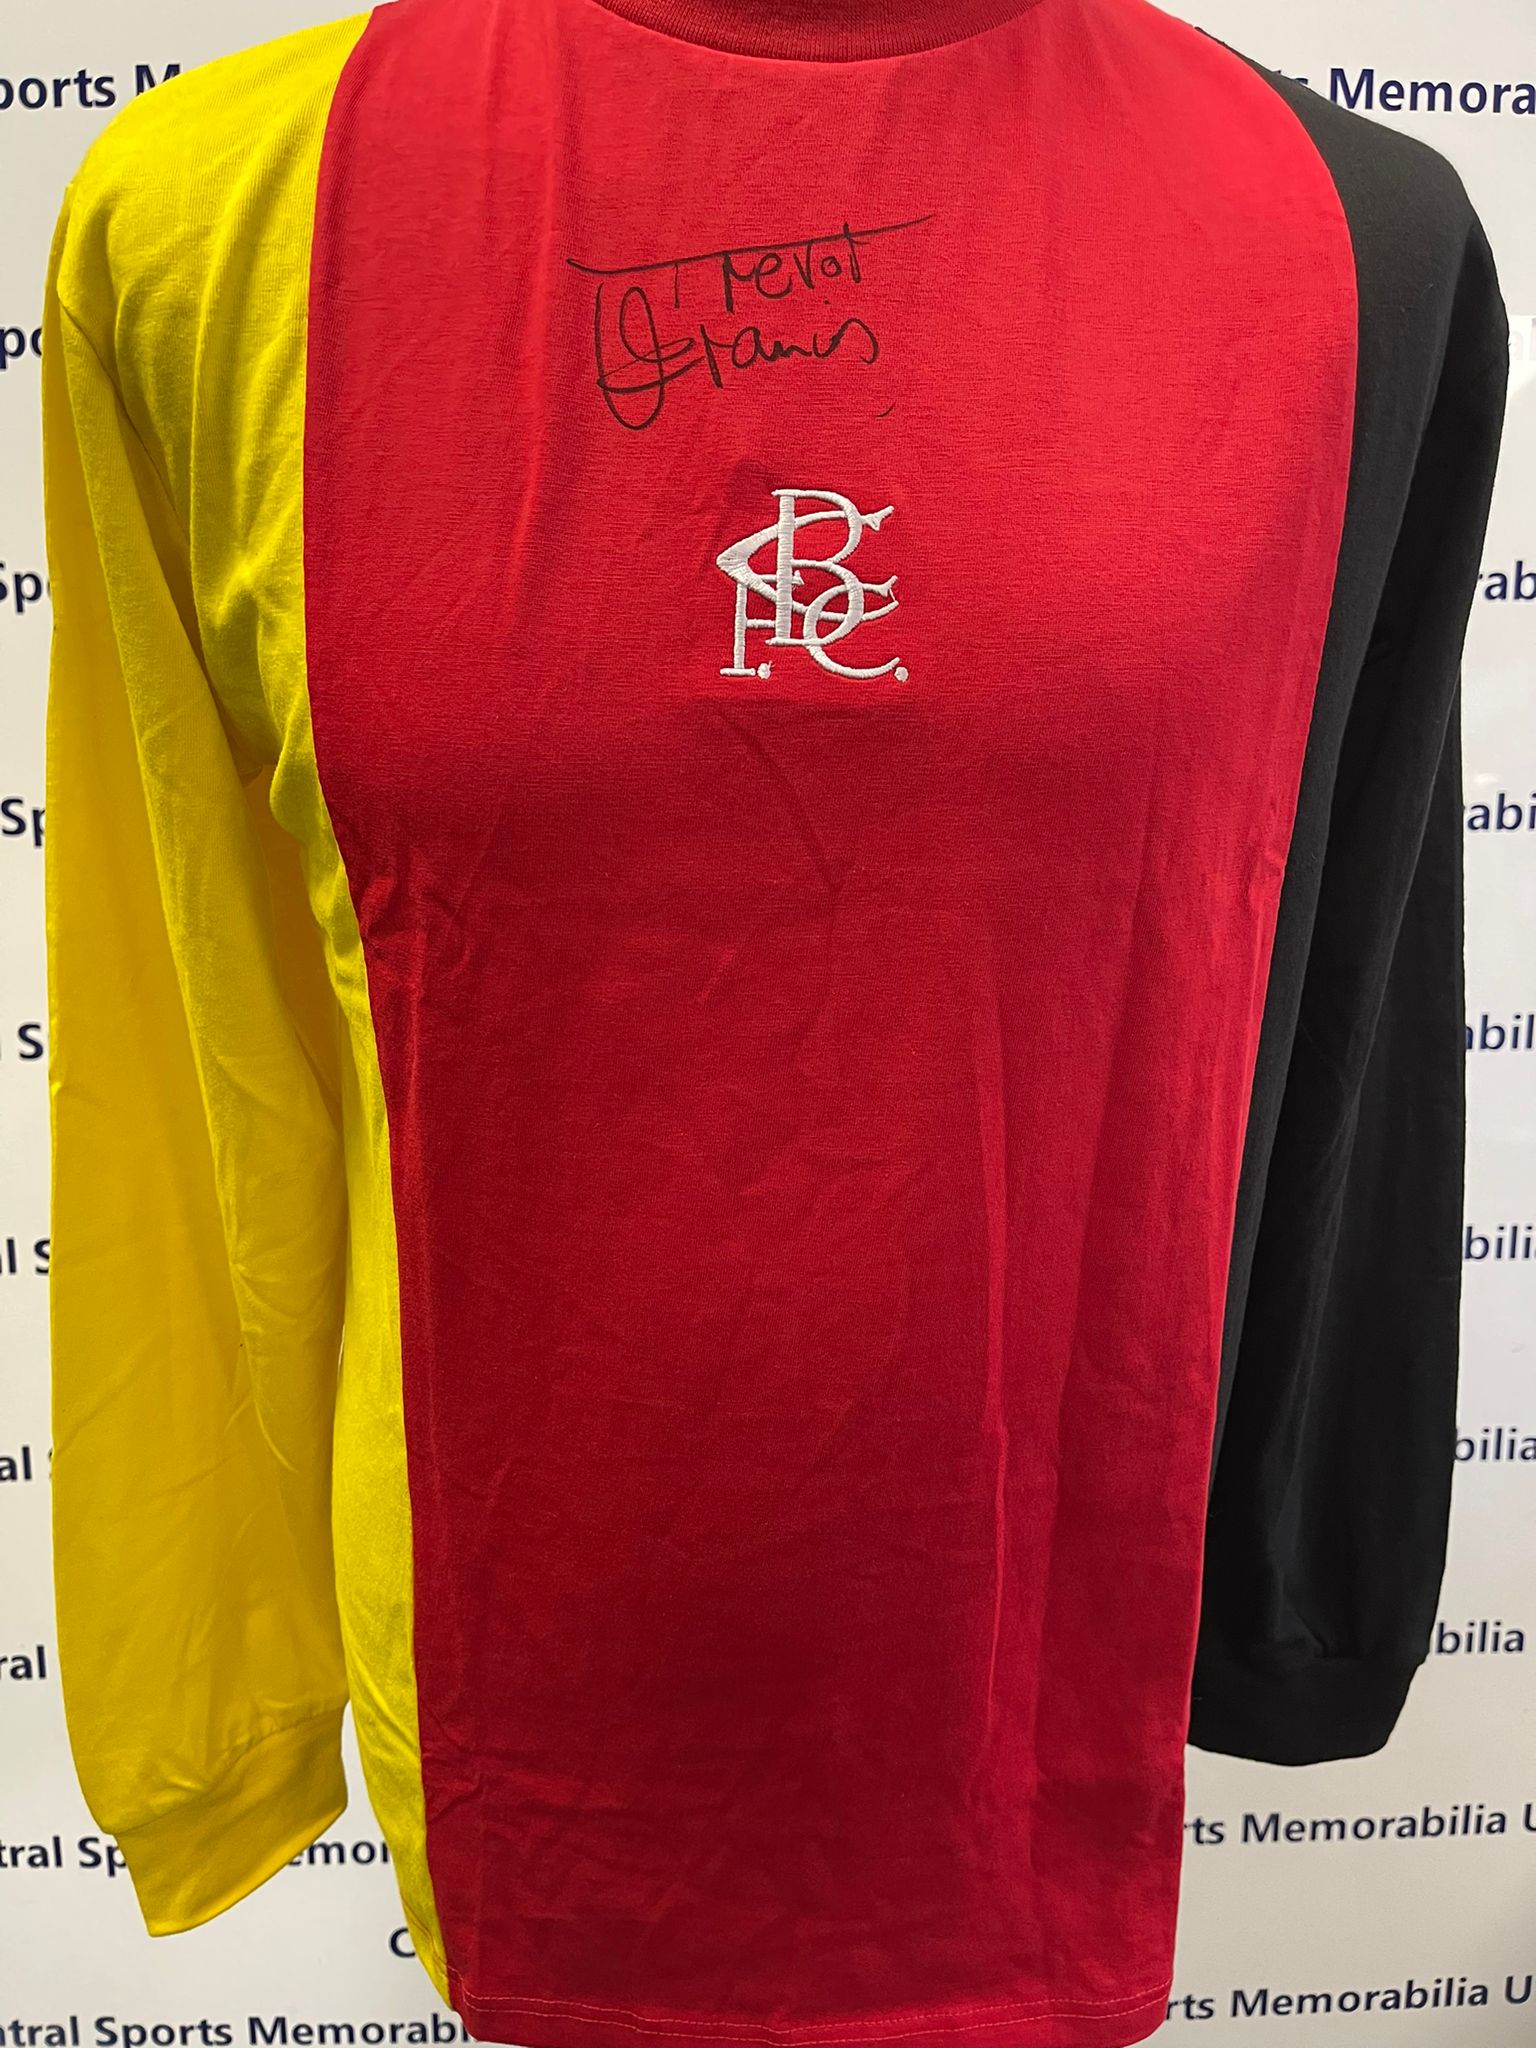 Birmingham City Retro Replica 70's Penguin Long Sleeve Shirts - Signed by Trevor Francis - 4 to choose from